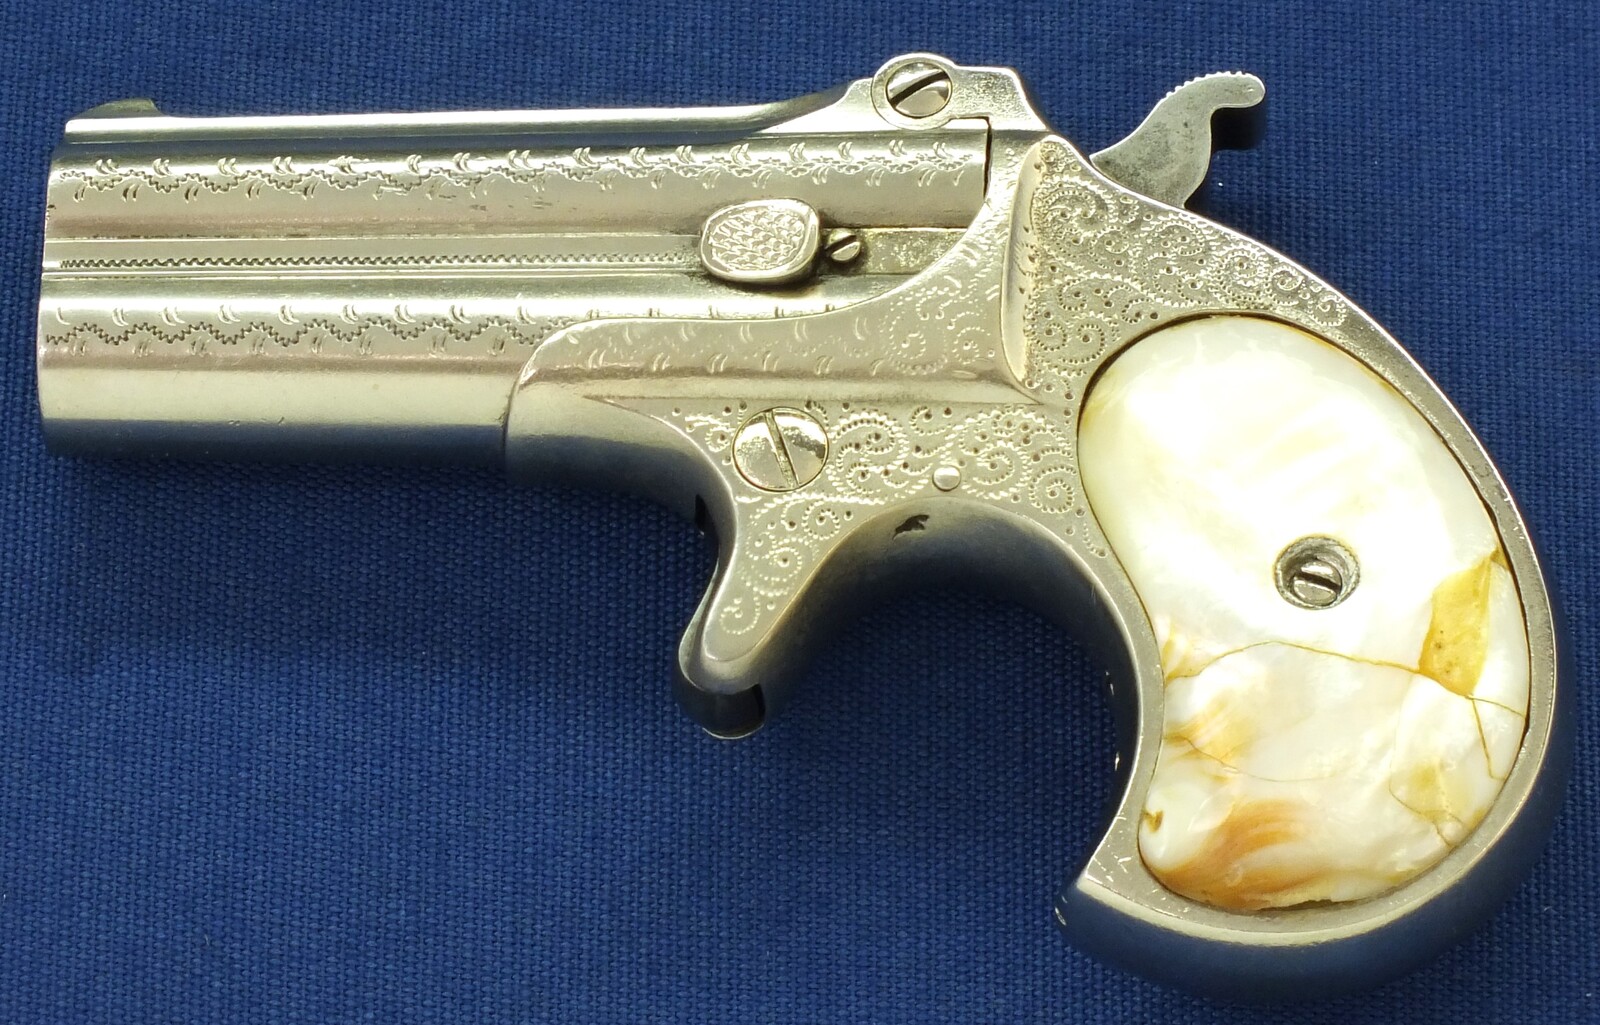 A fine antique American Nickel Plated factory Dot-Punch Engraved Remington Double Deringer Type I, Model No. 2 with Mother of pearl Grips. Caliber 41 Rimfire. In very good condition. Price 2.750 euro.